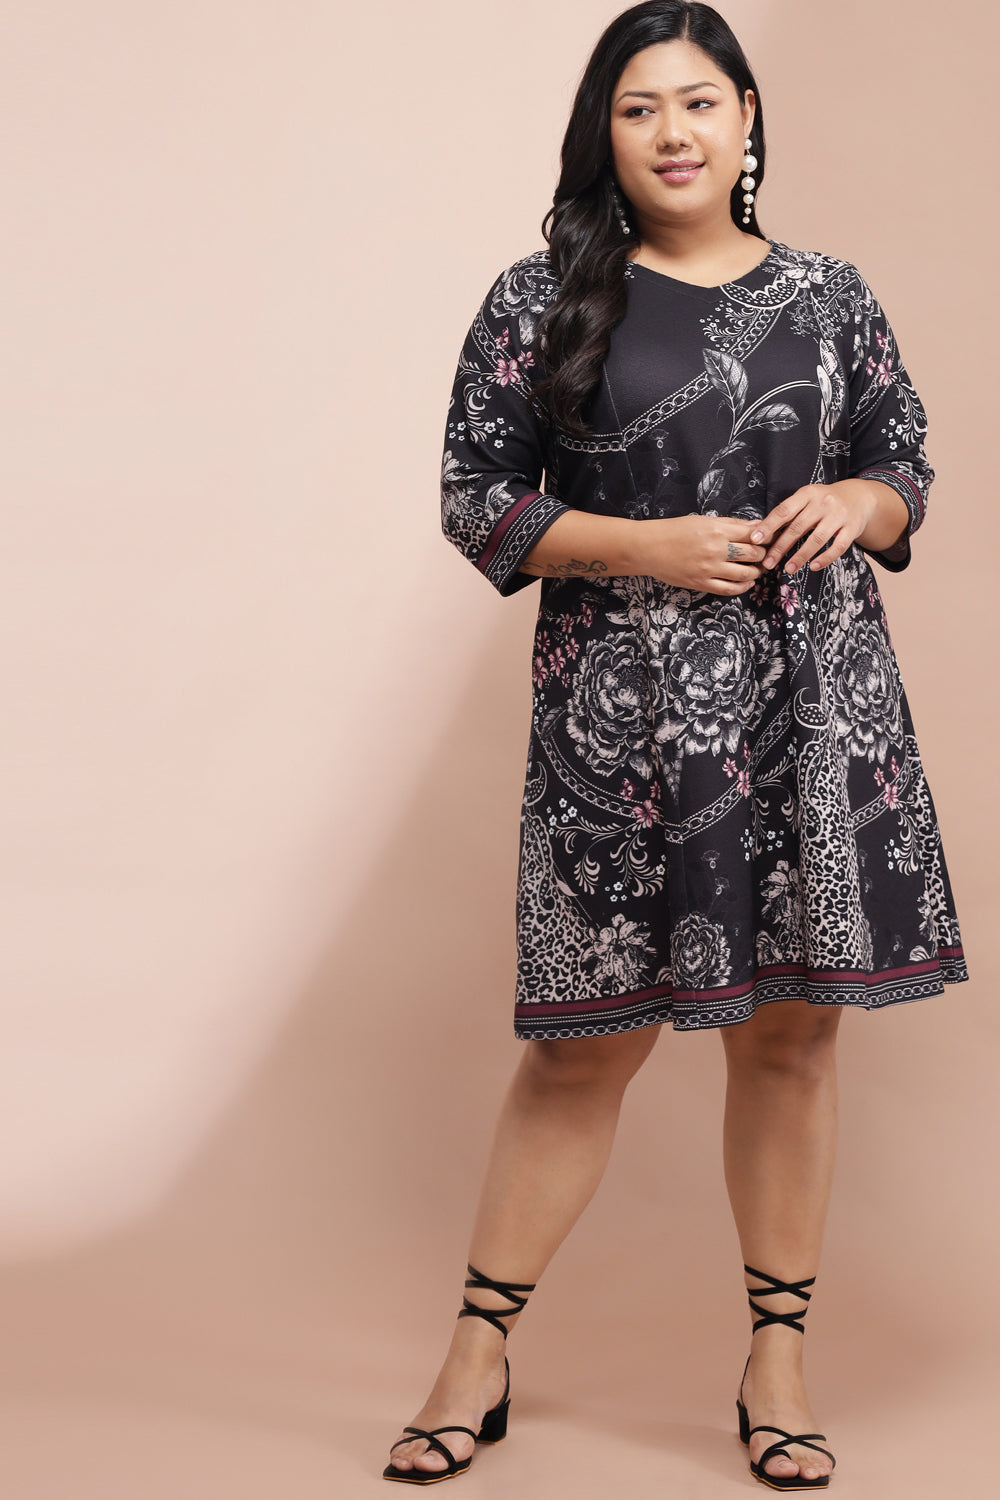 Buy Eclectic Printed Party Dress